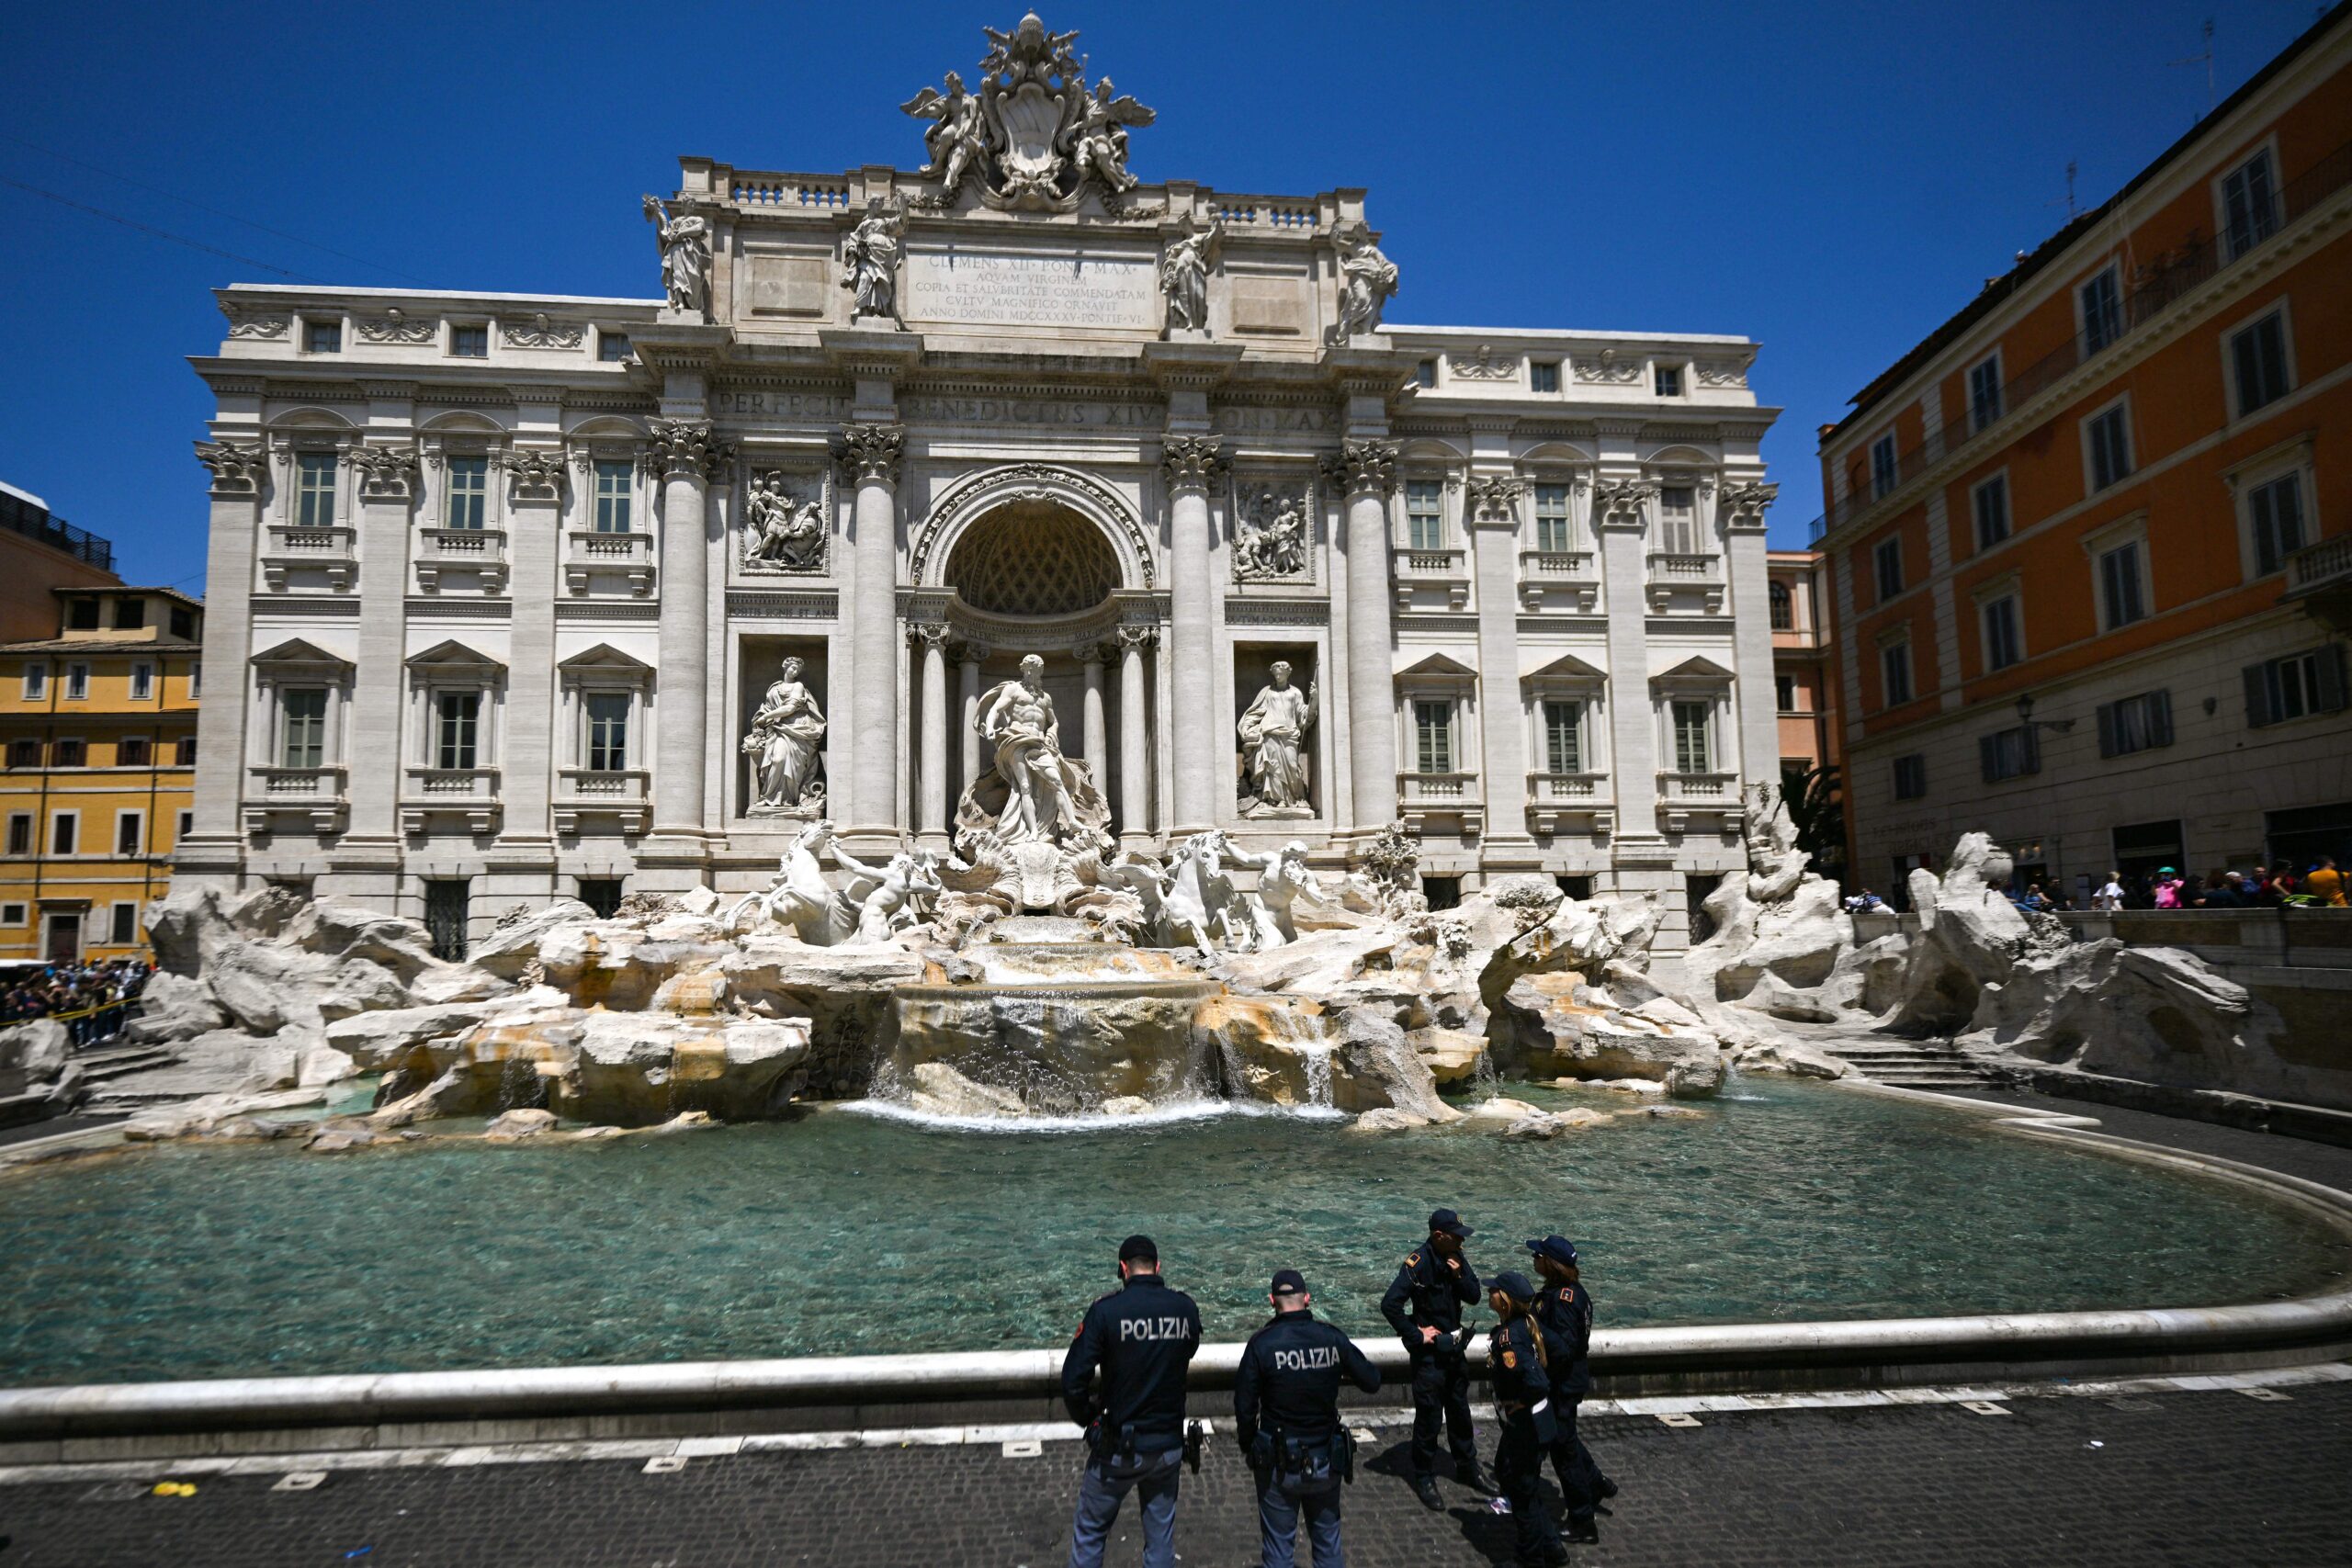 Rome mayor blames climate activists for turning Trevi Fountain water black with charcoal, causing environmental damage.